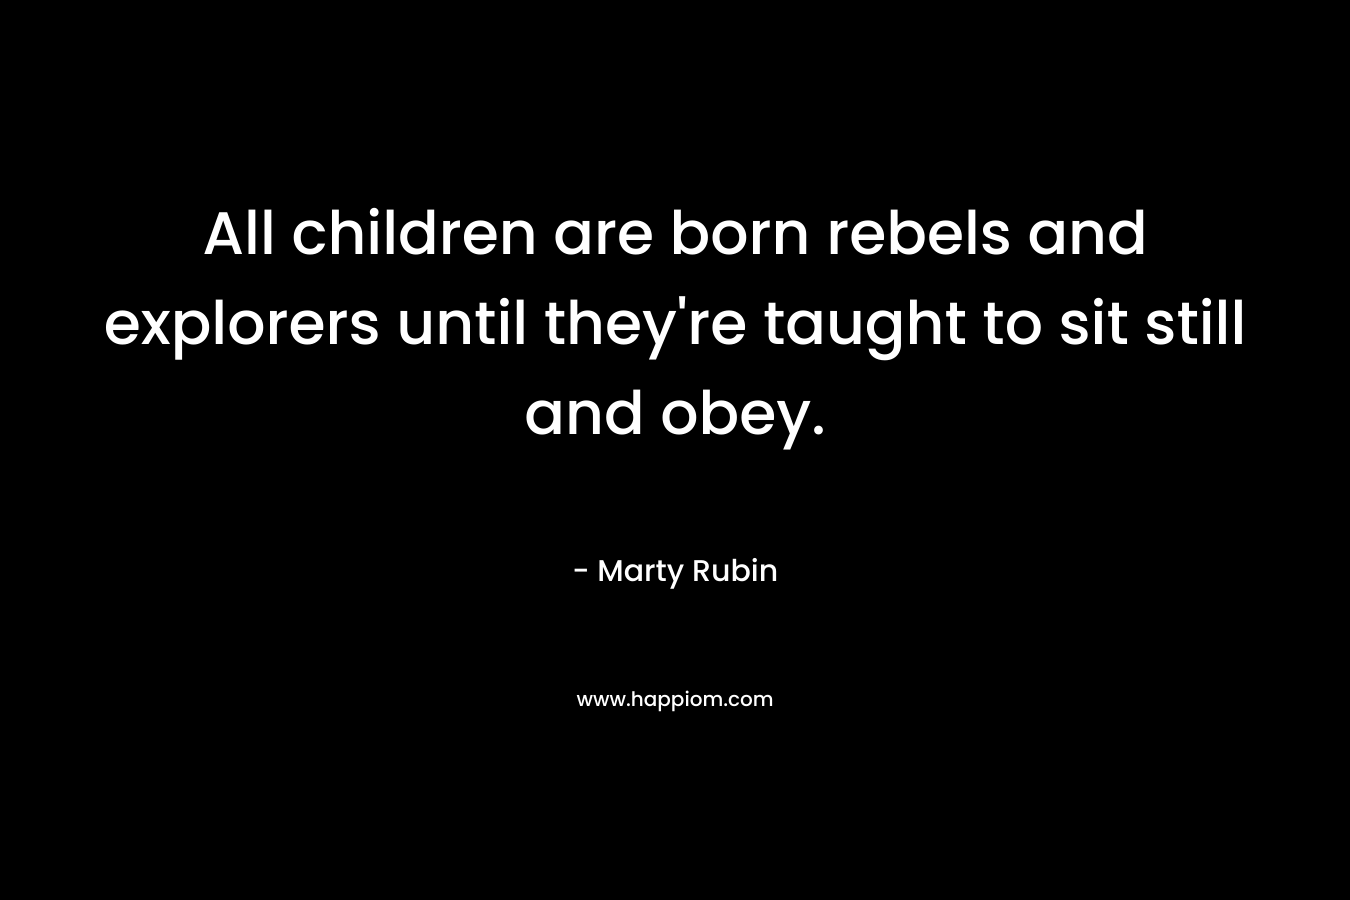 All children are born rebels and explorers until they're taught to sit still and obey.